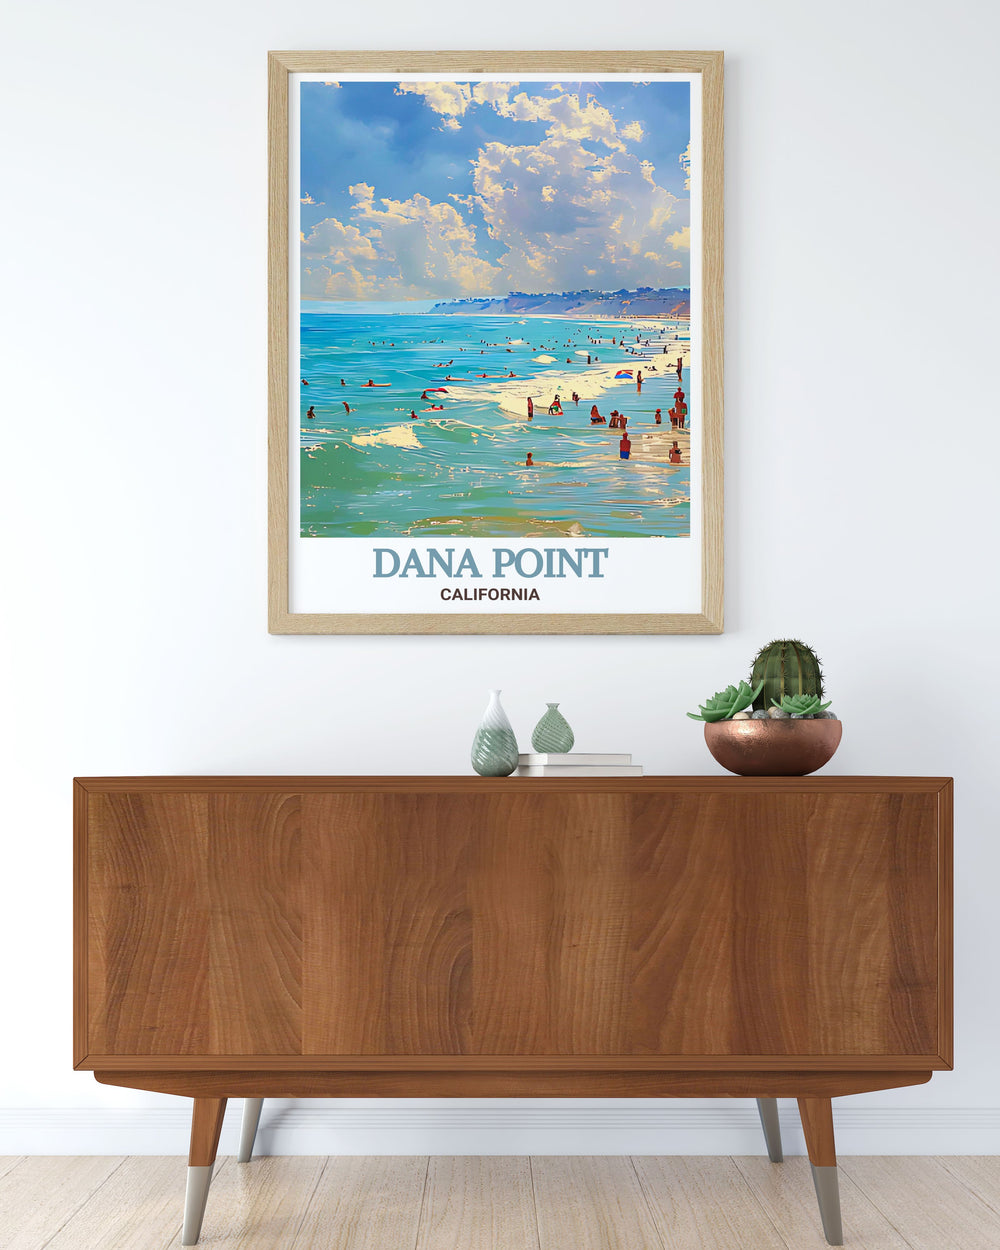 Enhance your home decor with this beautiful Doheny State Beach print. Featuring intricate details of the beach this California artwork is ideal for anyone who loves the serene and captivating landscapes of Doheny State Beach.